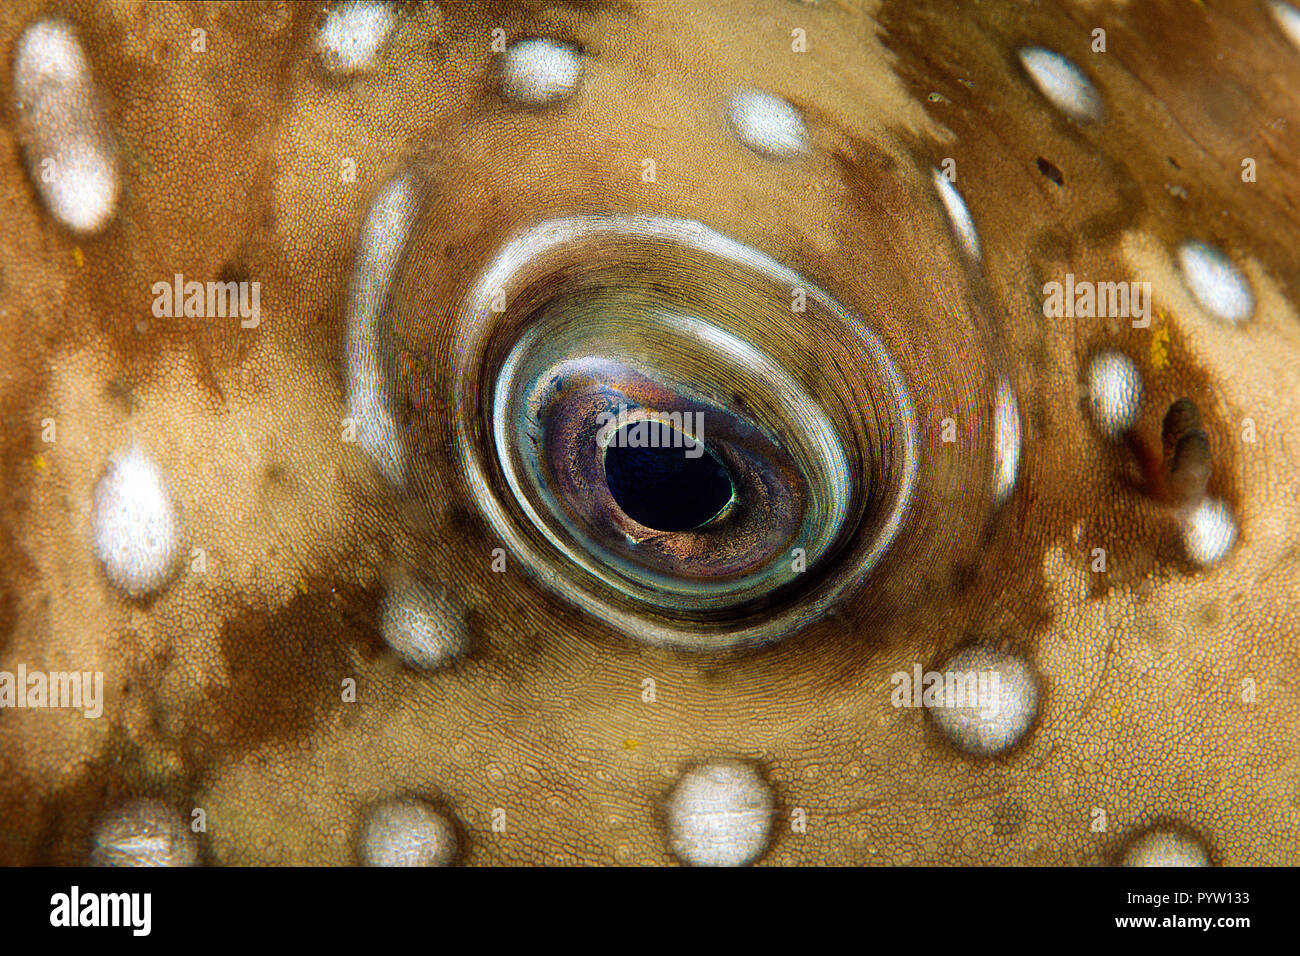 Eye detail of a Whitespotted puffer or Ringed puffer (Arothron hispidus), Bali island, Indonesia Stock Photo